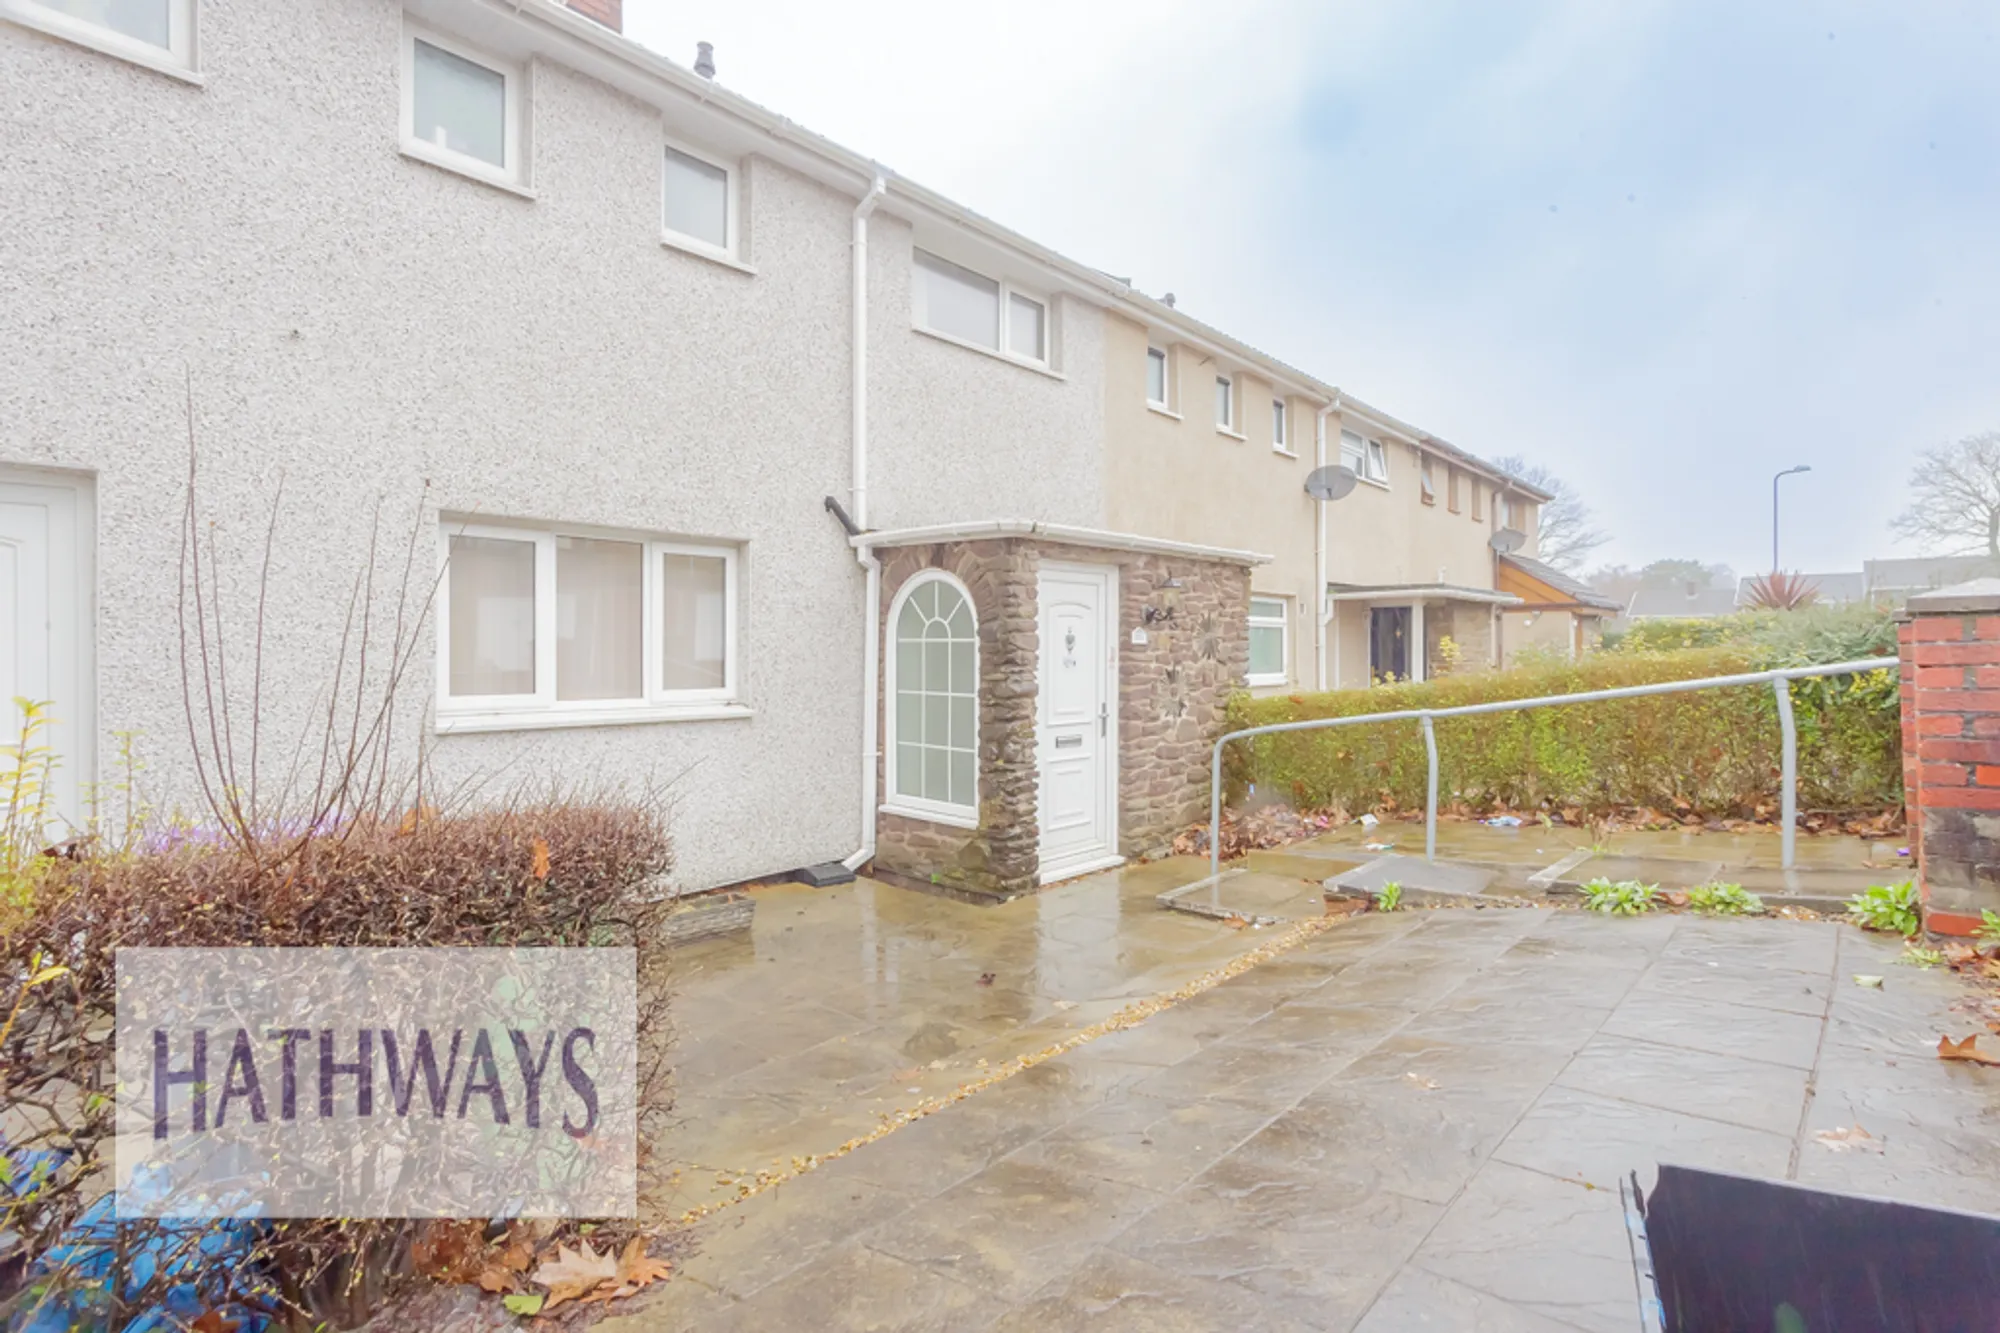 3 bed mid-terraced house for sale in Brynhyfryd, Cwmbran - Property Image 1